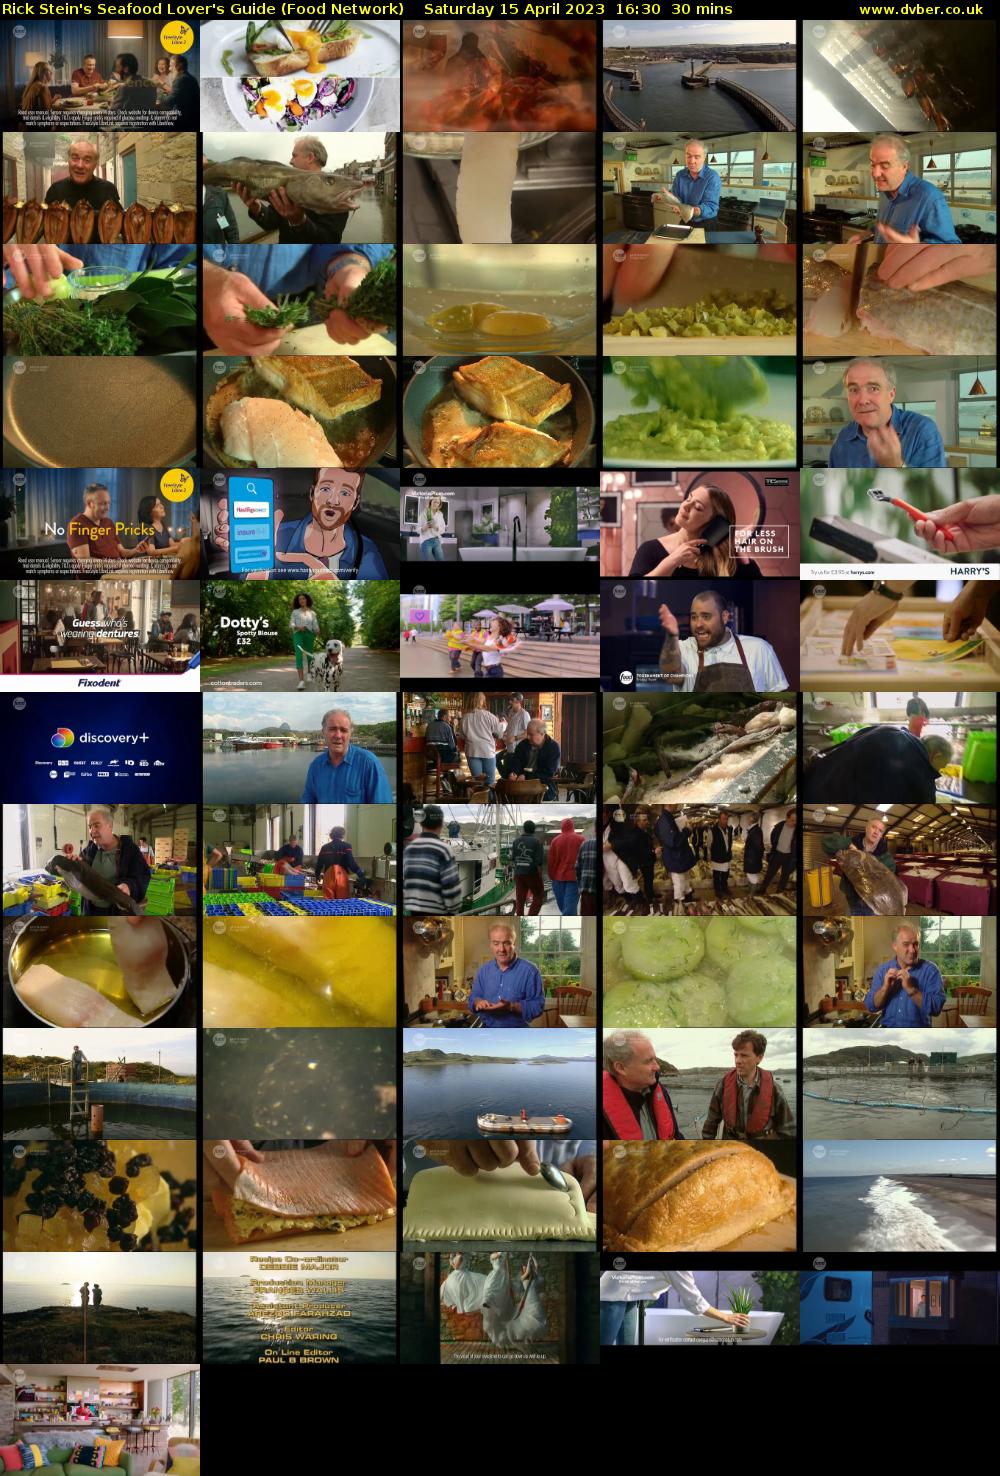 Rick Stein's Seafood Lover's Guide (Food Network) Saturday 15 April 2023 16:30 - 17:00